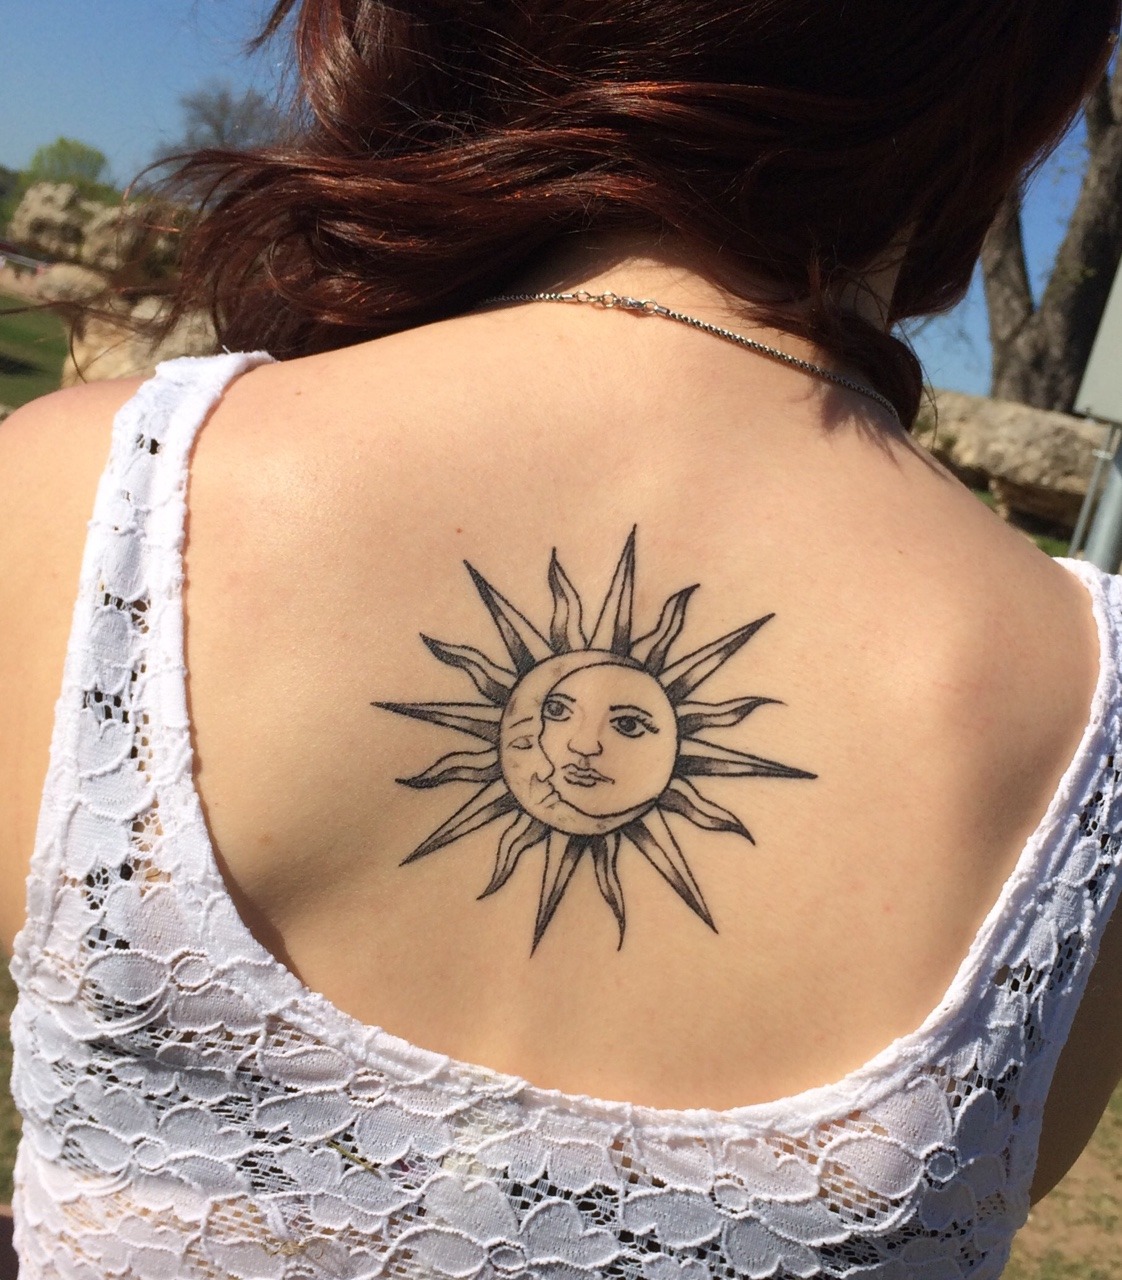 Grannys Attic Tattoo  Little smiling sun done awhile ago by our artist  Aitor Hes got space coming up so drop us a message at infogrannysattic tattoonet if youre interested If youd like